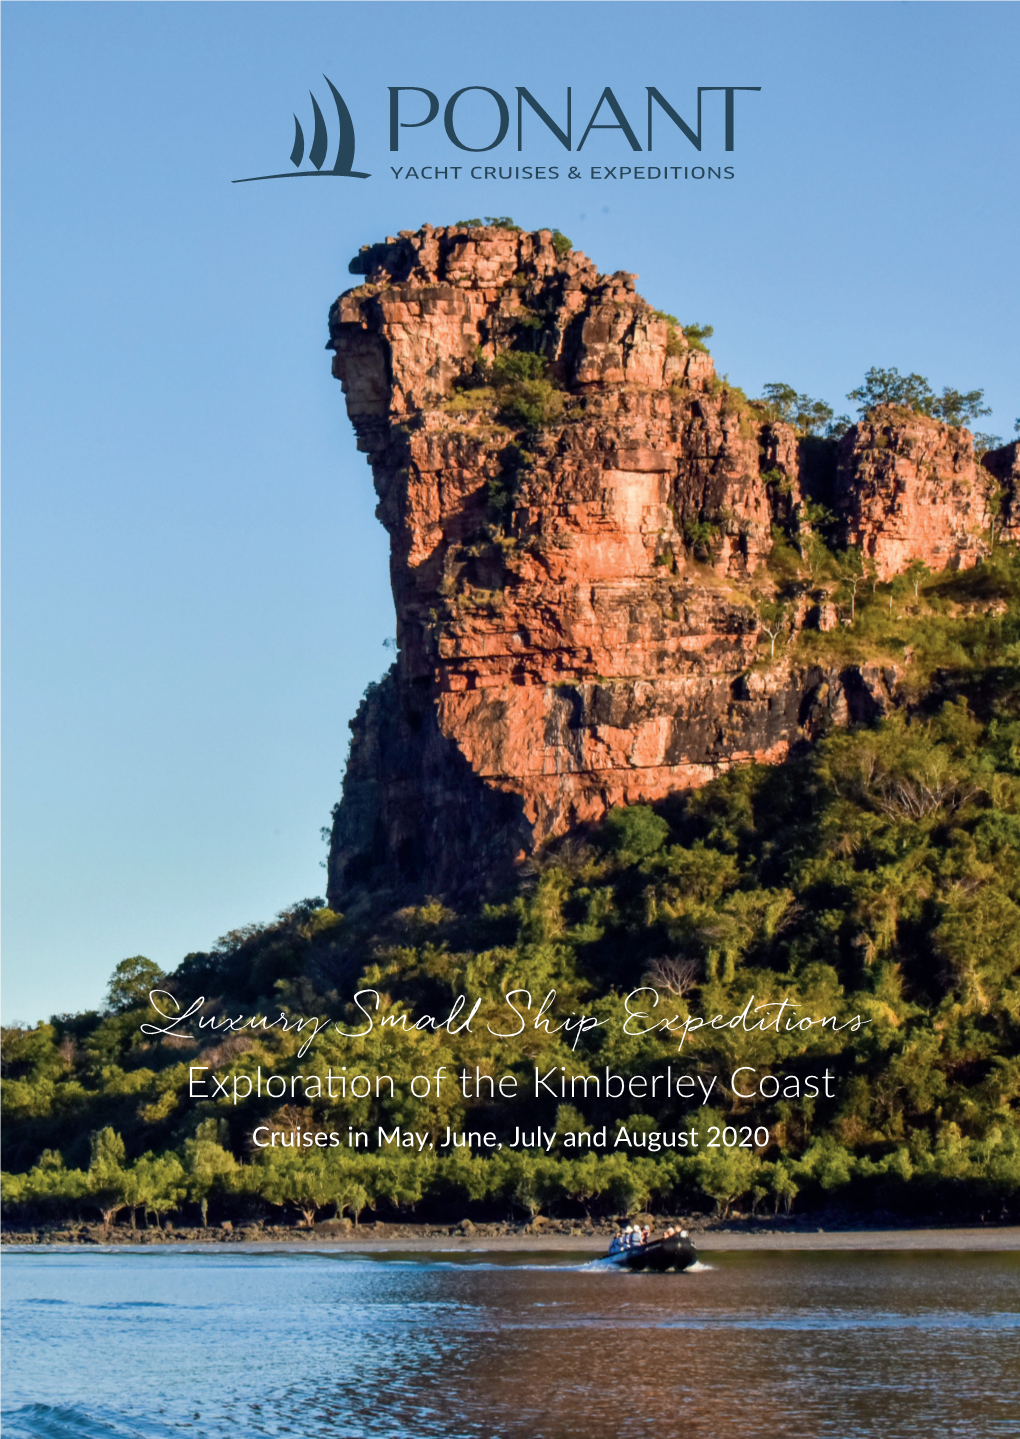 Luxury Small Ship Expeditions Exploration of the Kimberley Coast Cruises in May, June, July and August 2020